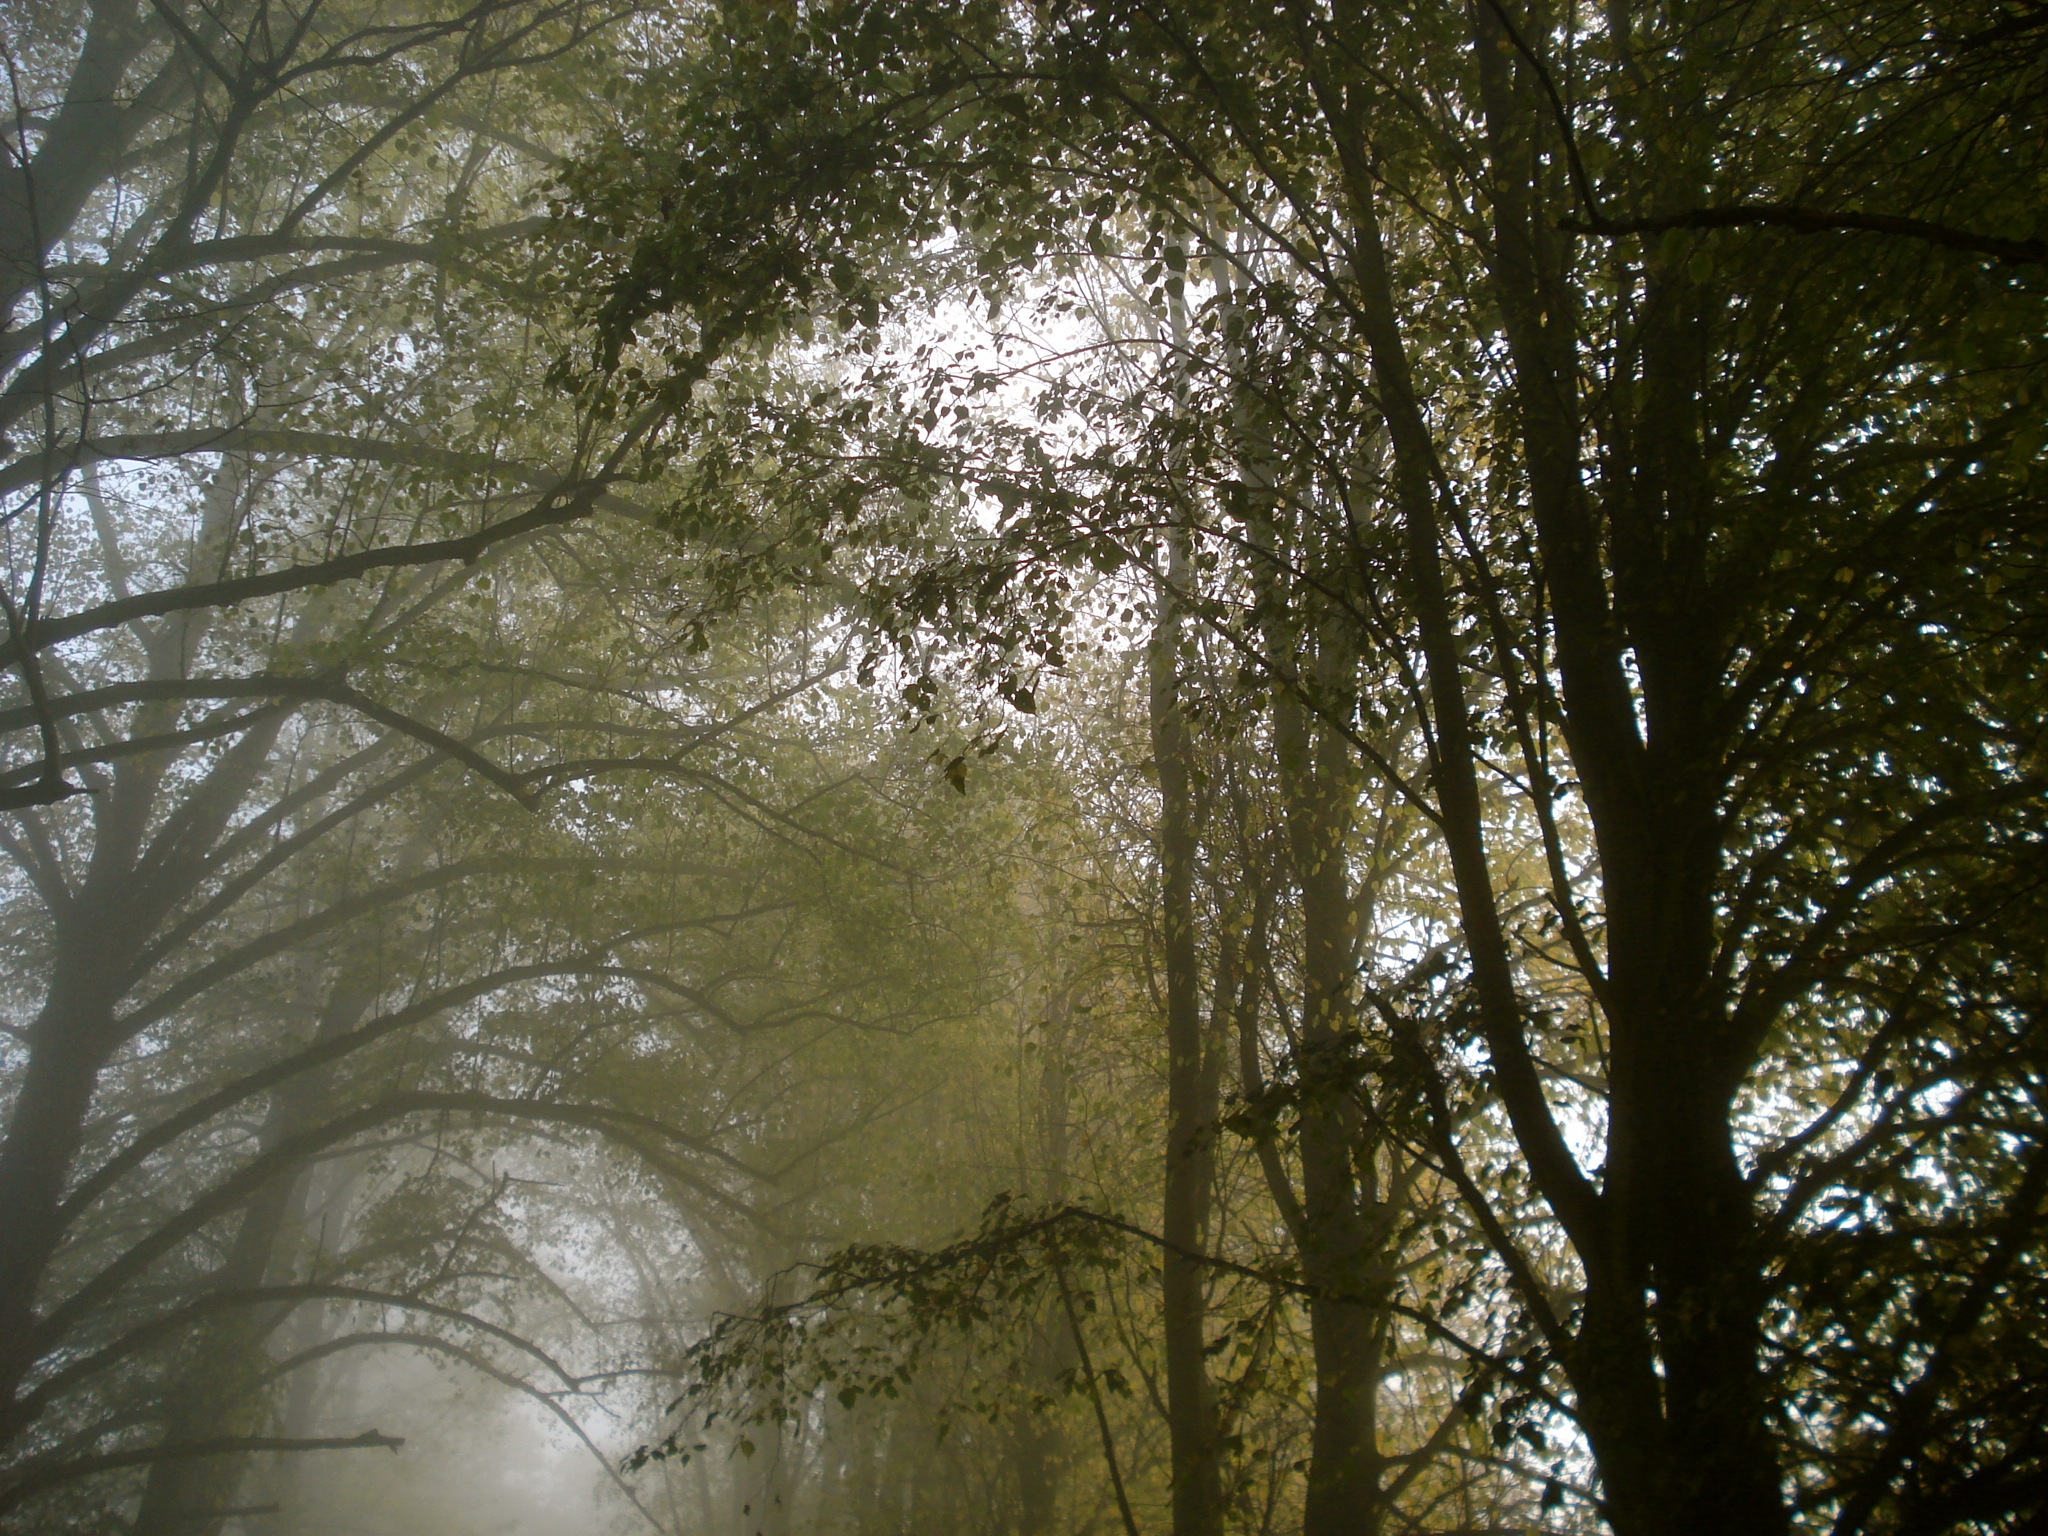 an image of a foggy forest scene